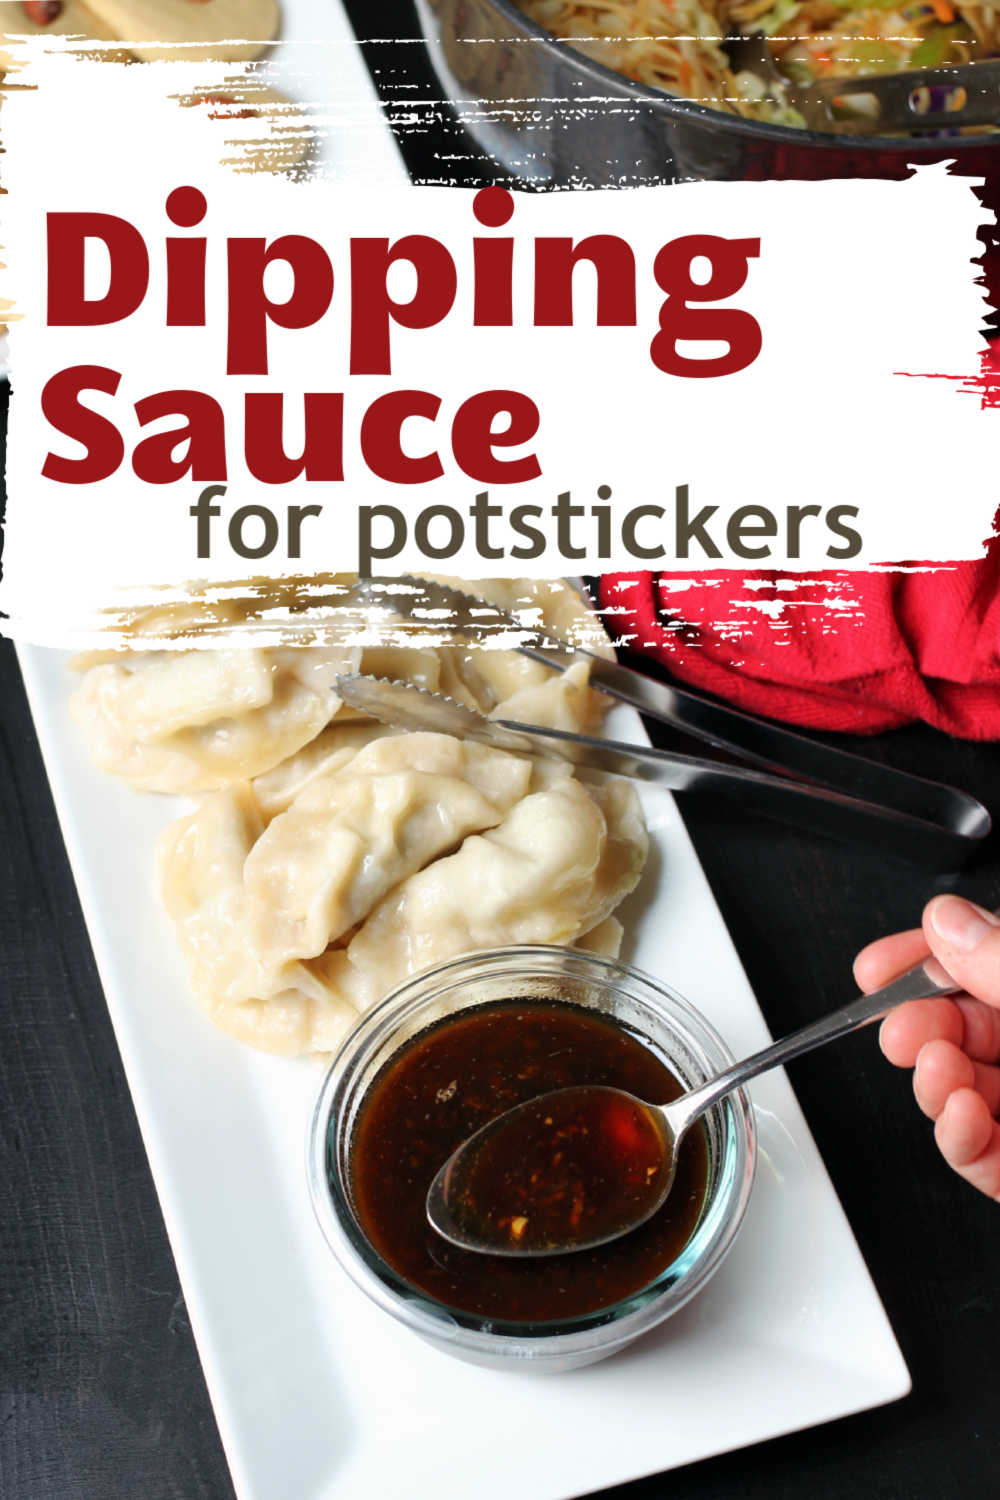 A tray of potstickers, with Dipping sauce